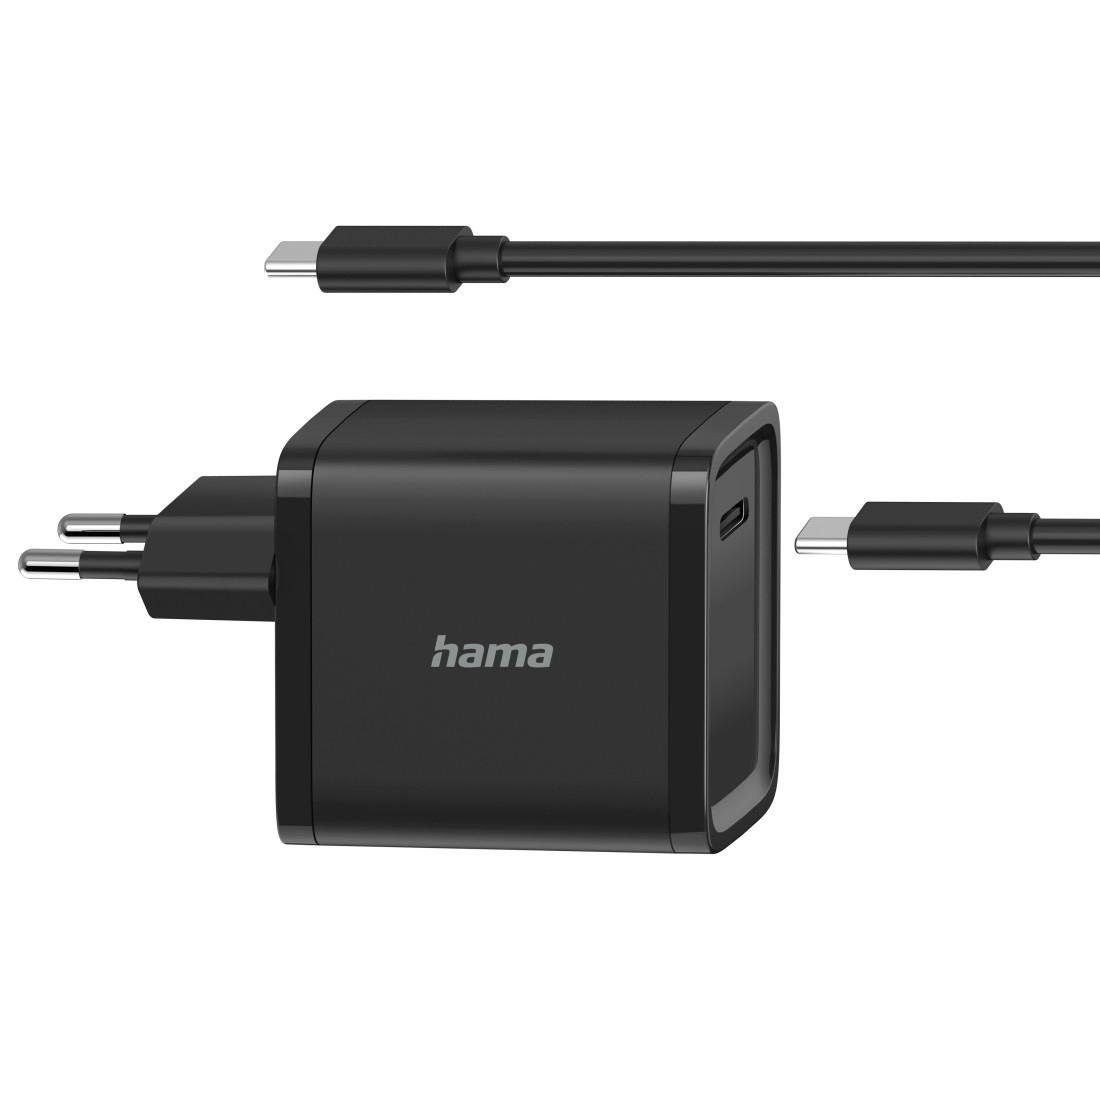 Hama Universal-USB-C-Notebook-Netzteil, Power Delivery (PD) 5-20V/45W Notebook-Netzteil